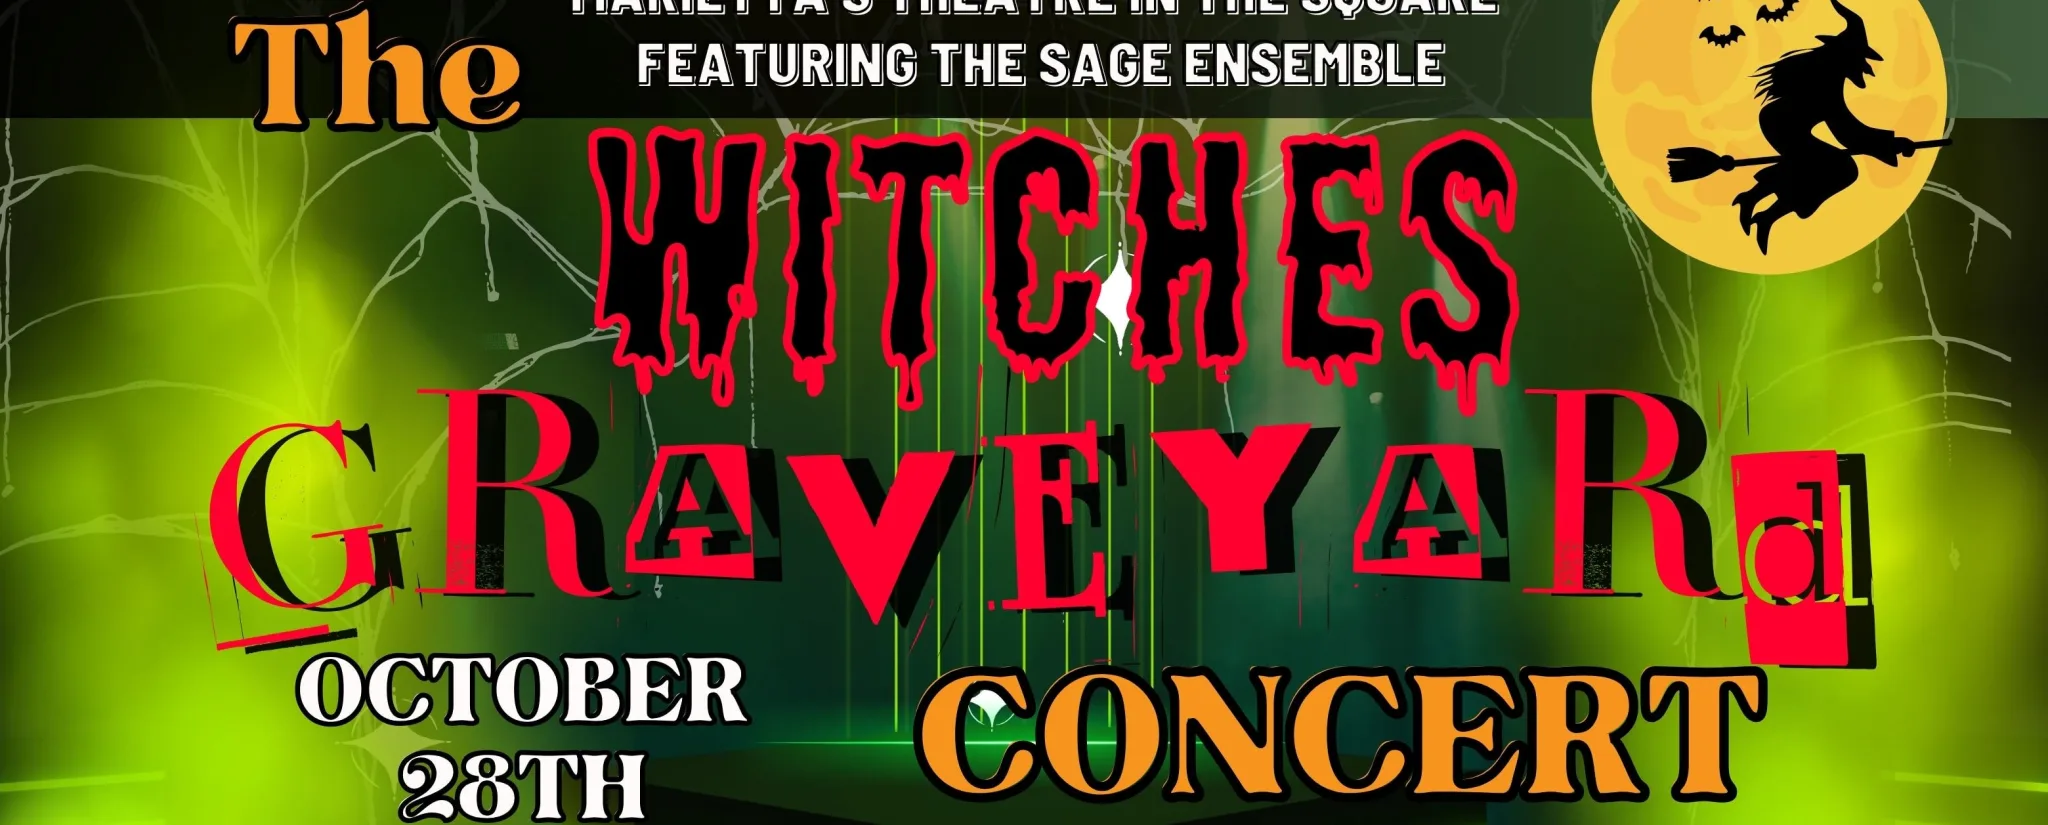 The Witches Graveyard Concert: A Celebrations of Musical Hits throughout Time